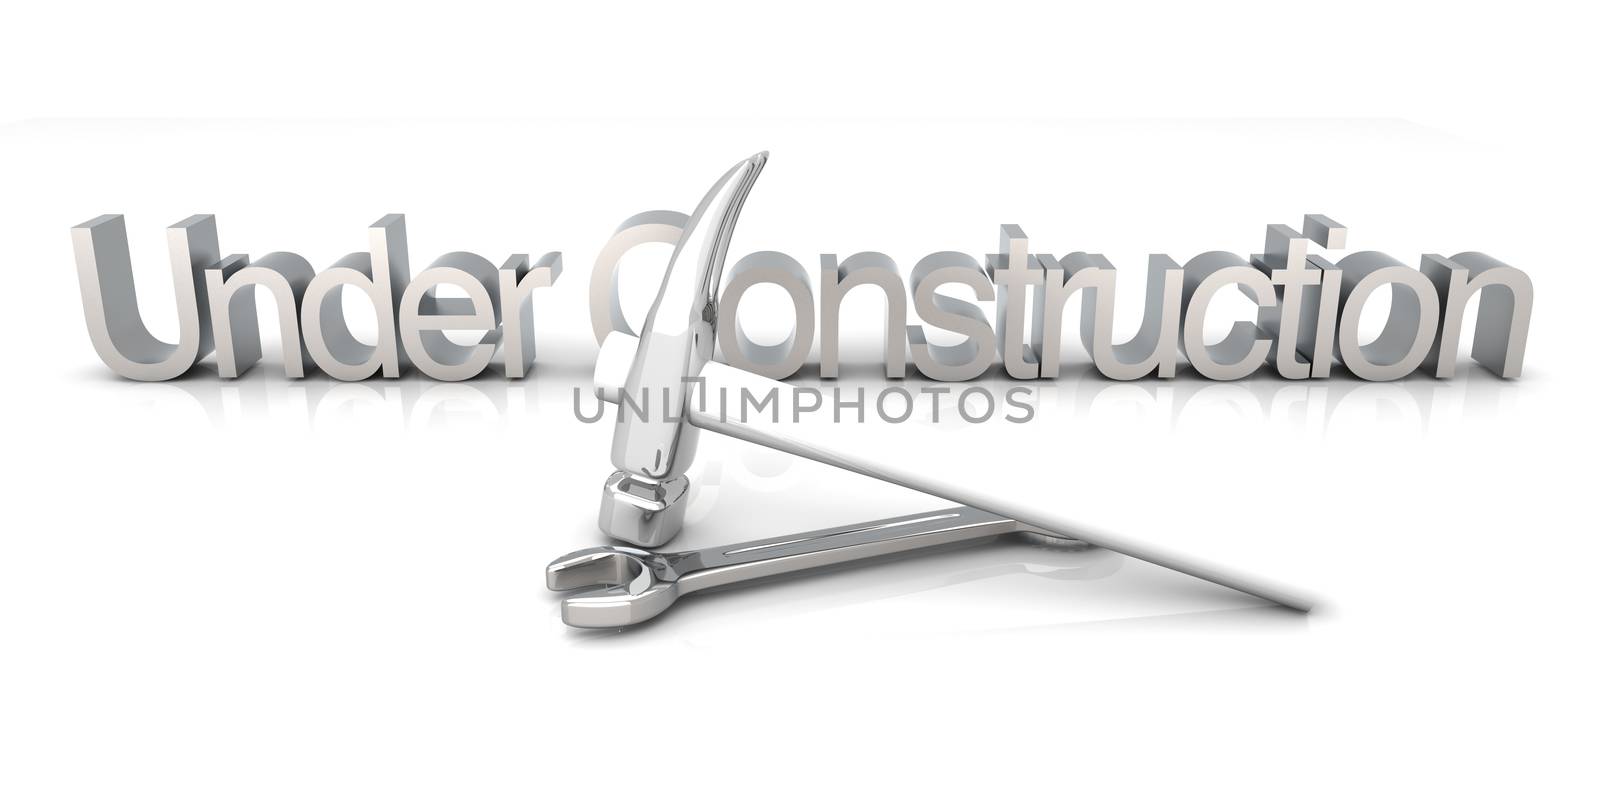 3D Illustration. Website is under construction. Isolated on white.